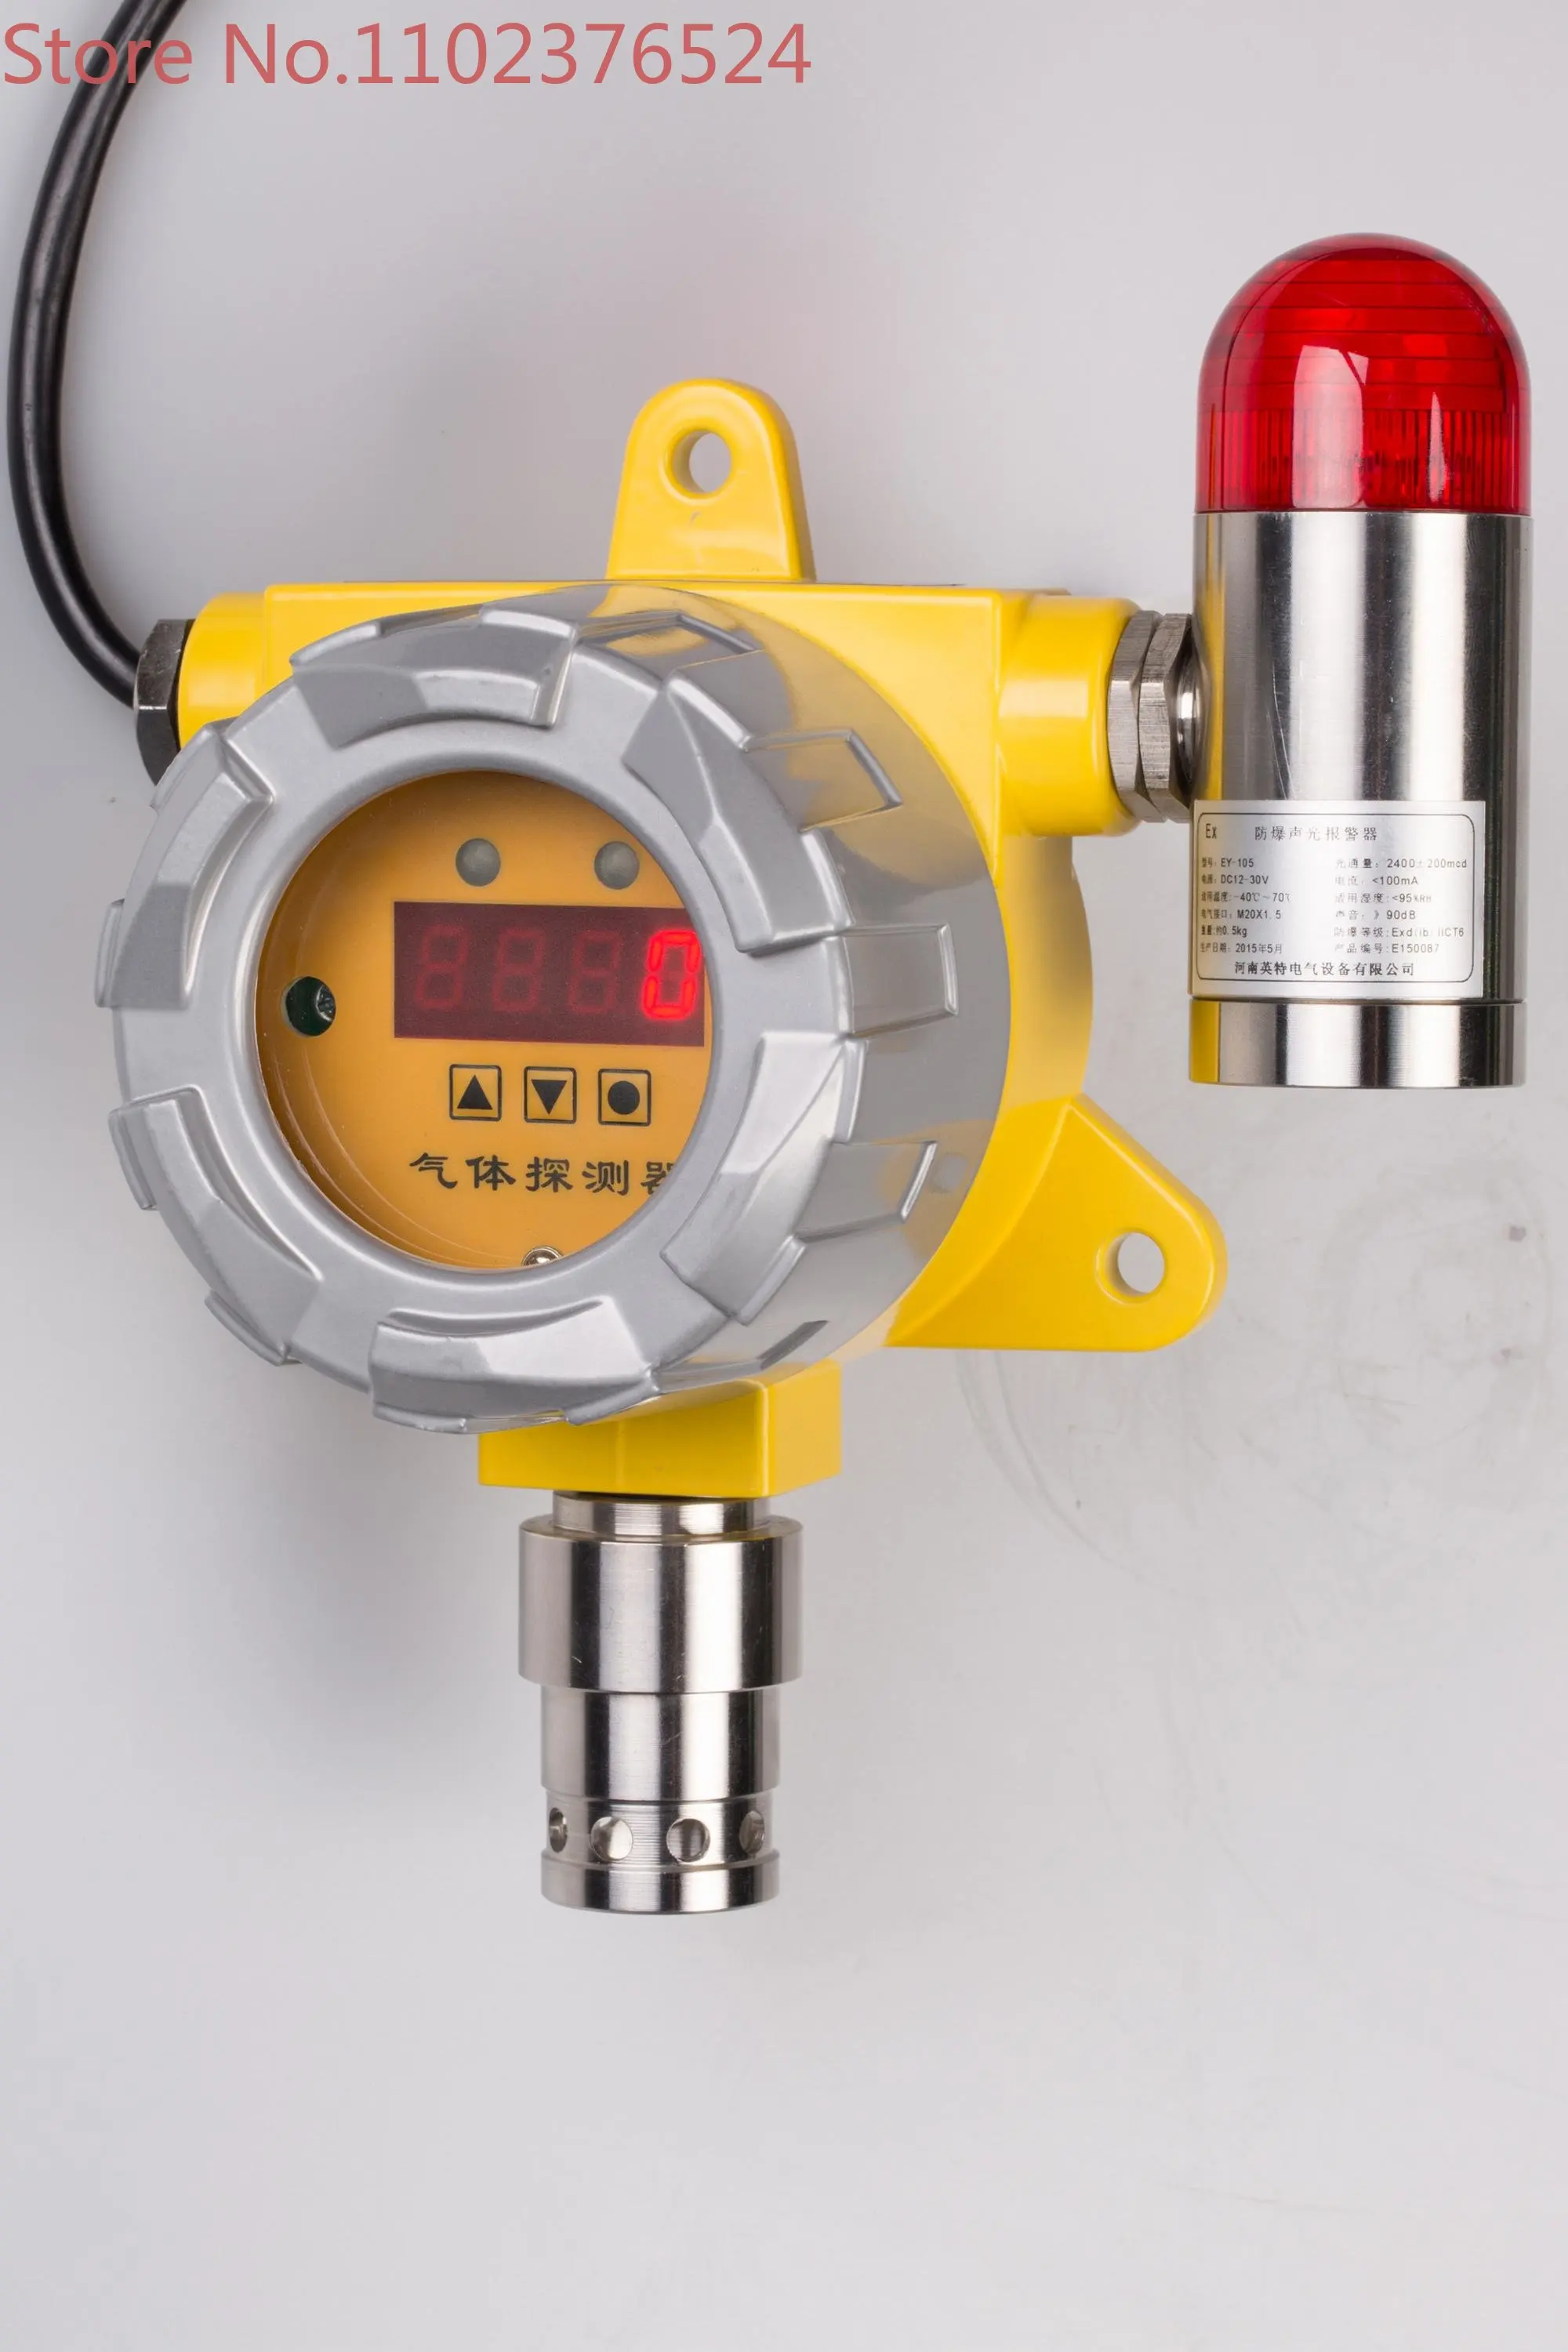 

factory supply wall-mounted gas detector for EX CO O2 H2S O3 NO2 NO 4-20mA RS485 relay output gas sensor